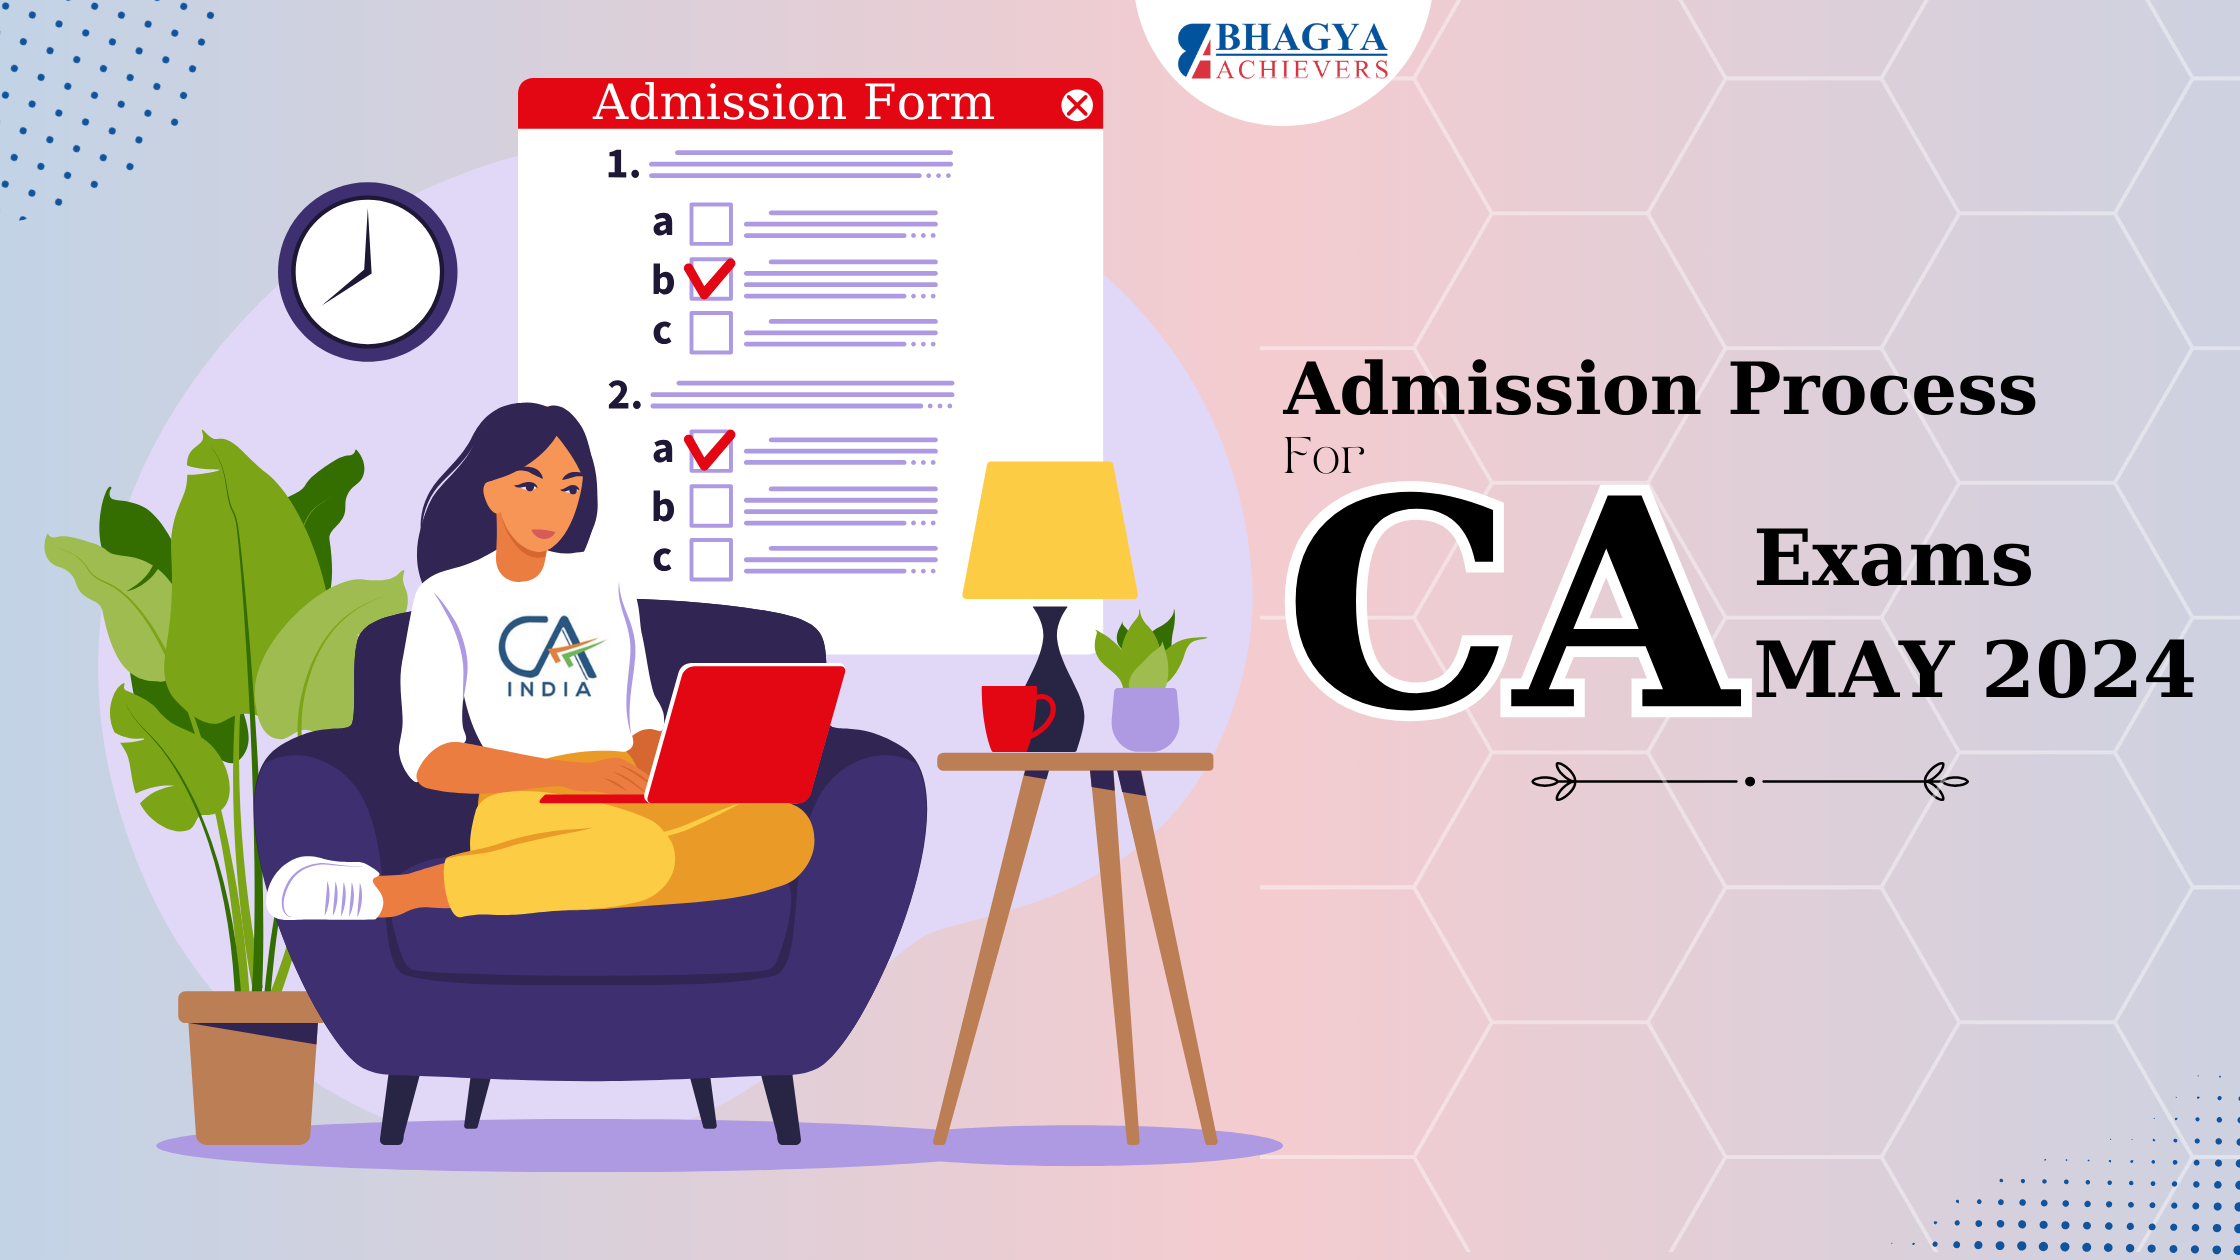 Admission Process for CA (Chartered Accountant) Exams May 2024 - Bhagya Achievers